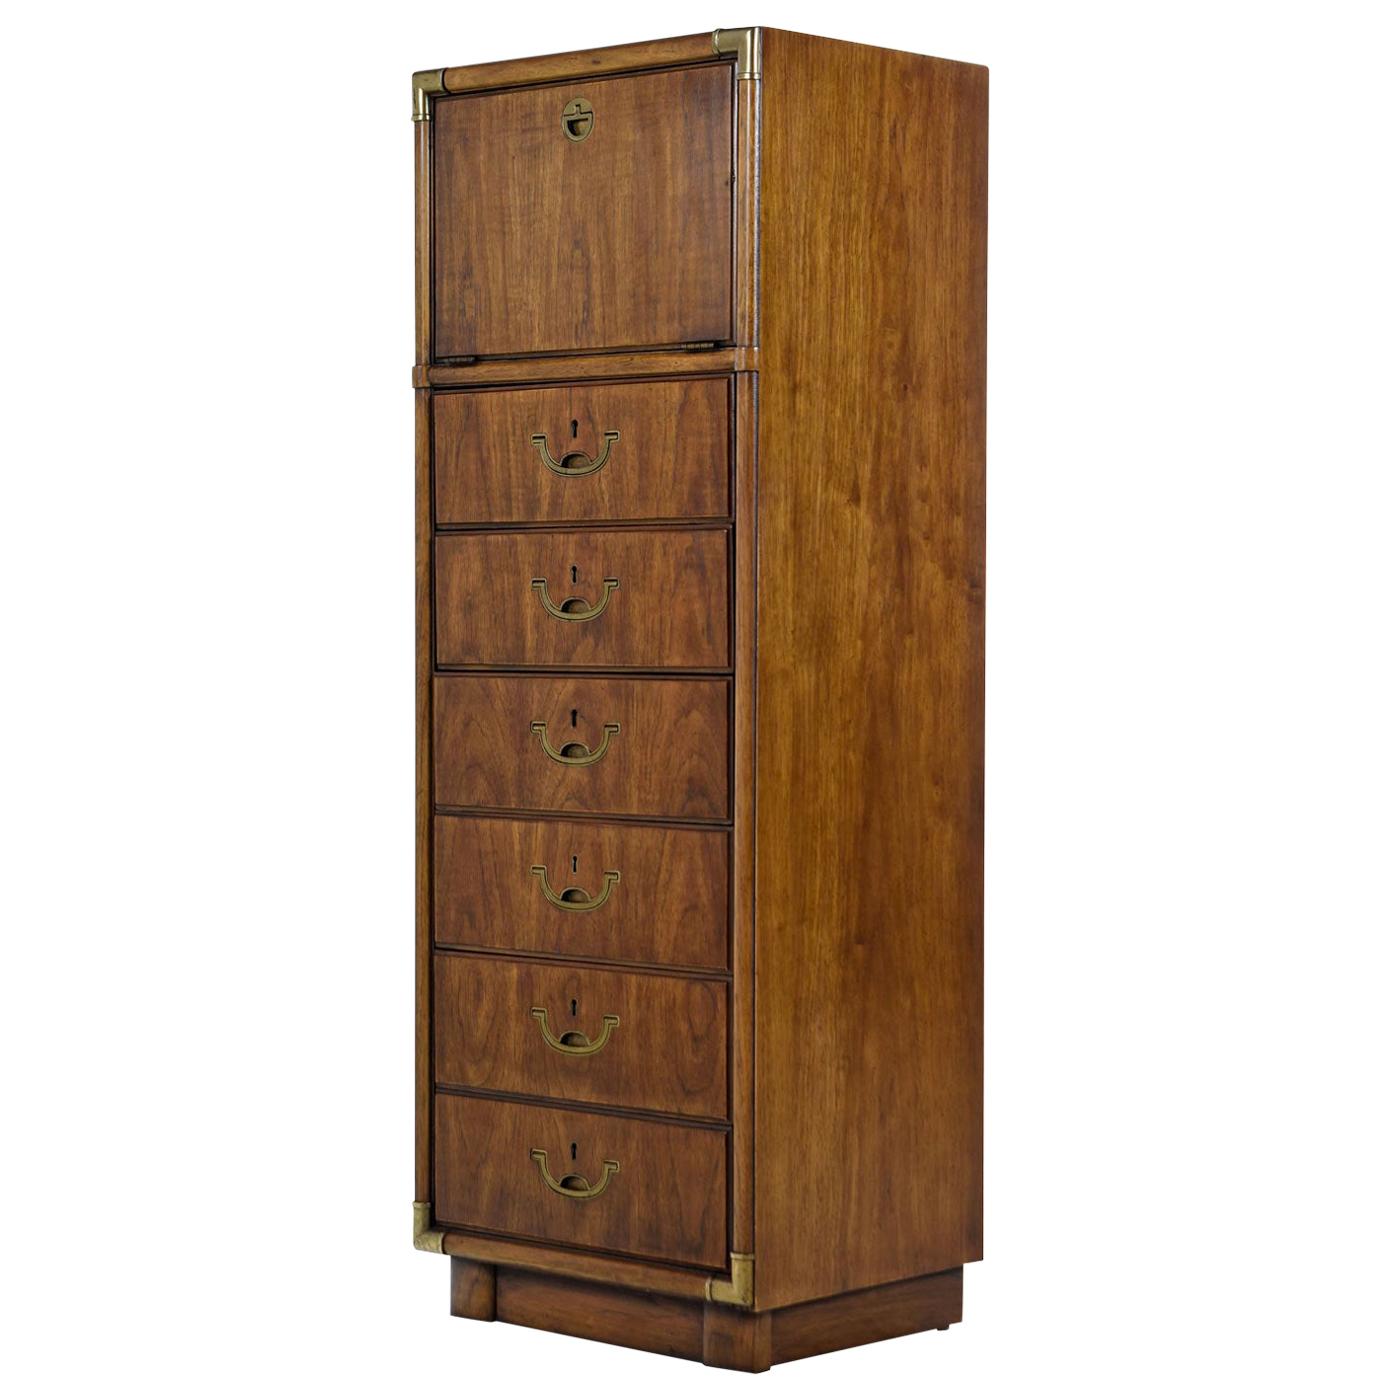 Solid wood Campaign style tall chest of drawers made by esteemed US furniture maker Drexel Heritage in the 1970s. More than just storage, this tall and skinny tower is actually a vanity lingerie chest with a flip topmirror. Three small pull-out